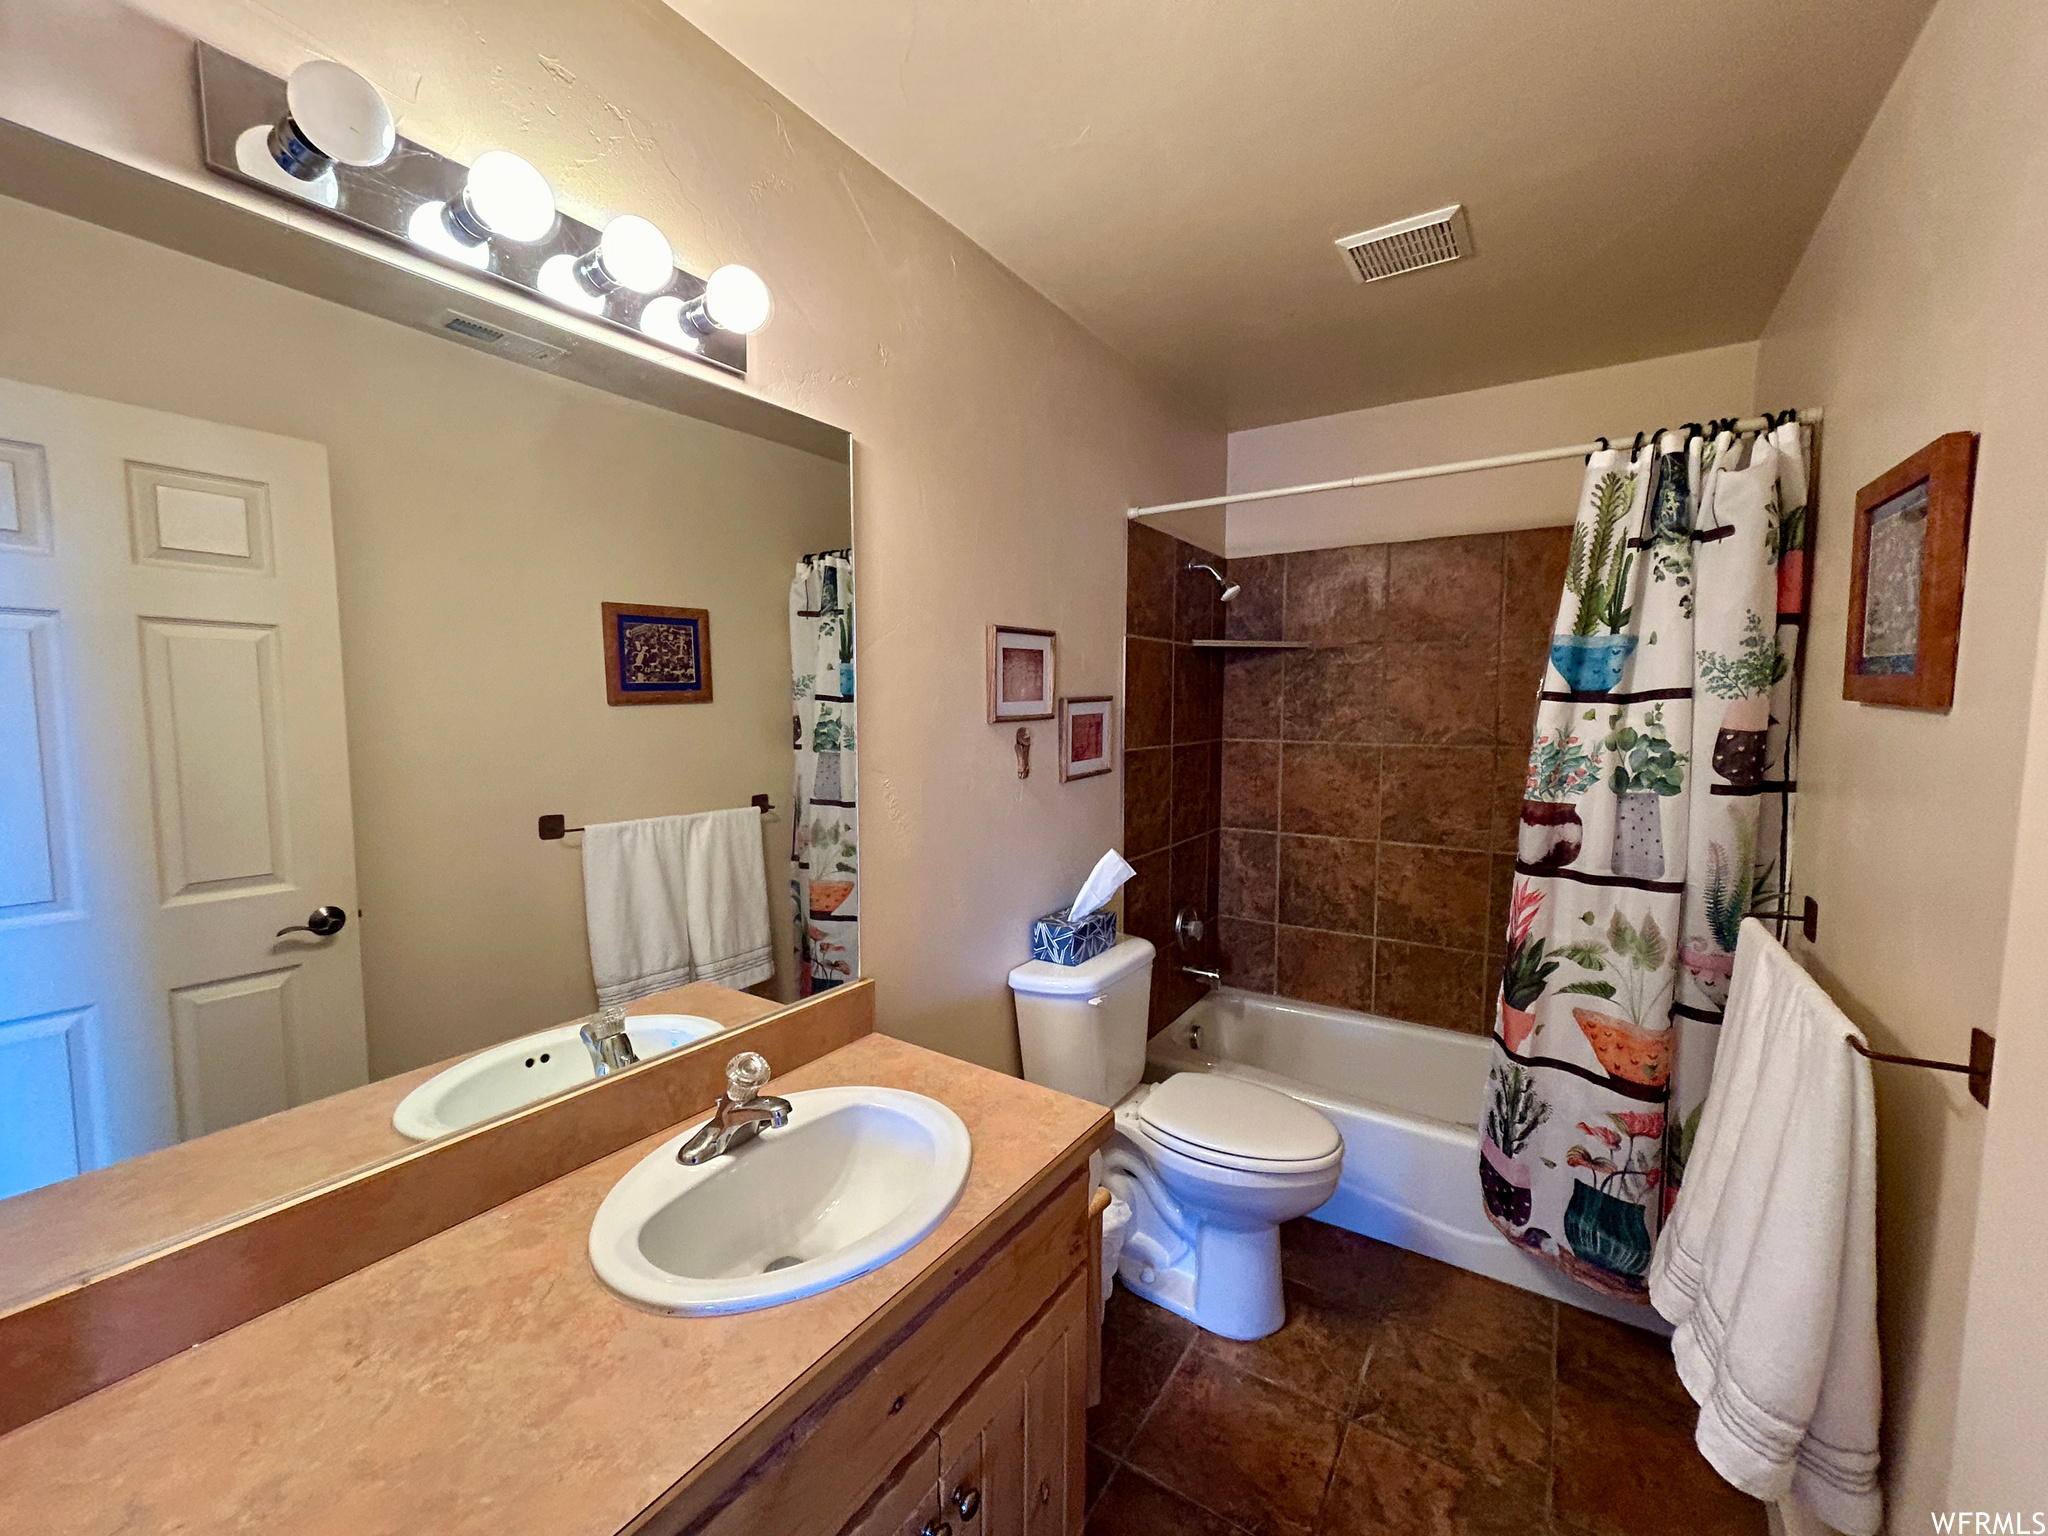 Guest bathroom with shower / tub combo with curtain, oversized vanity, toilet, and tile flooring